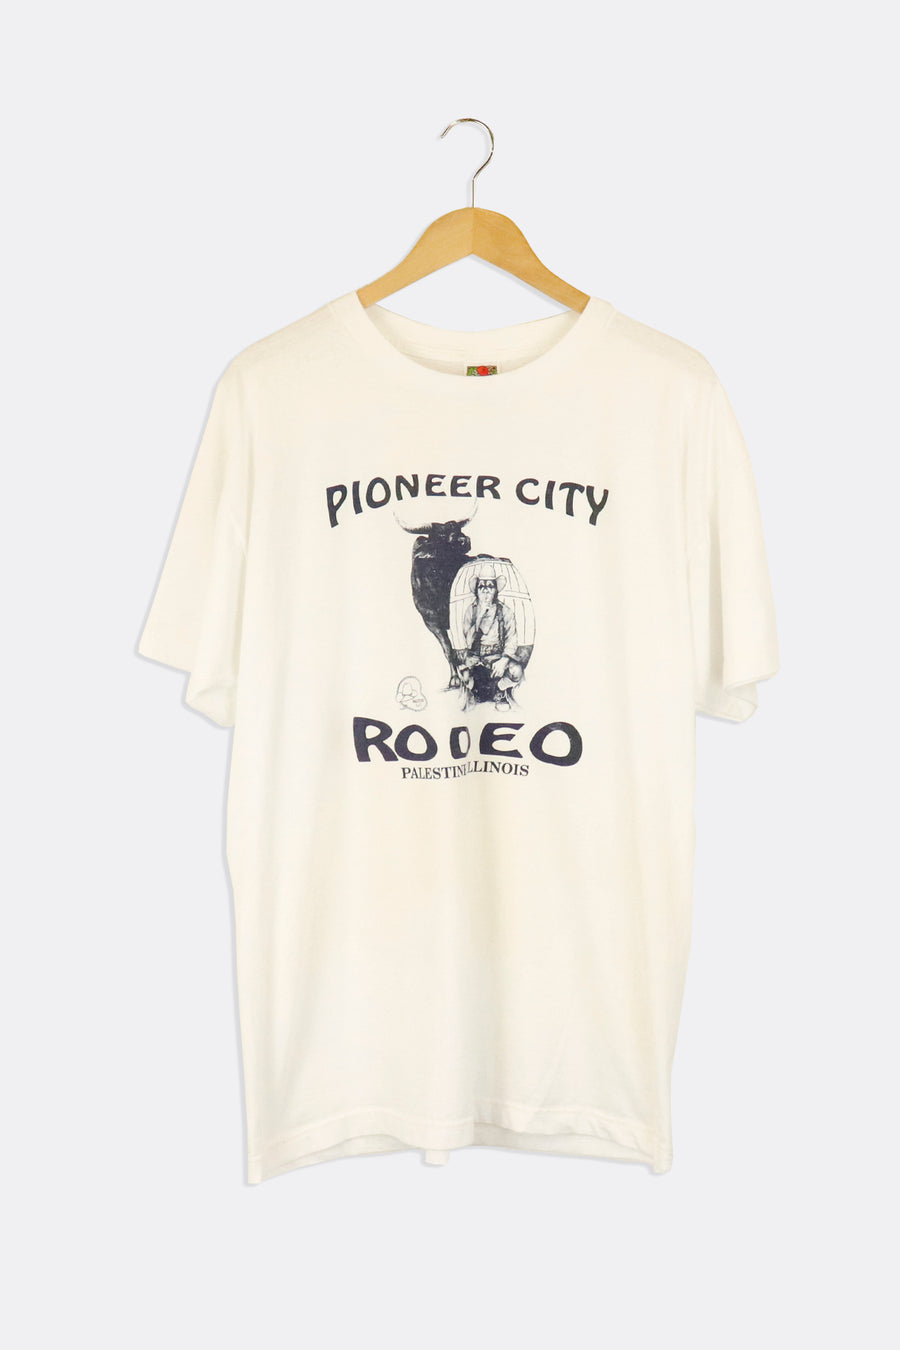 Vintage Pioneer City Rodeo Illinois Clown And Bull Graphic T Shirt Sz XL